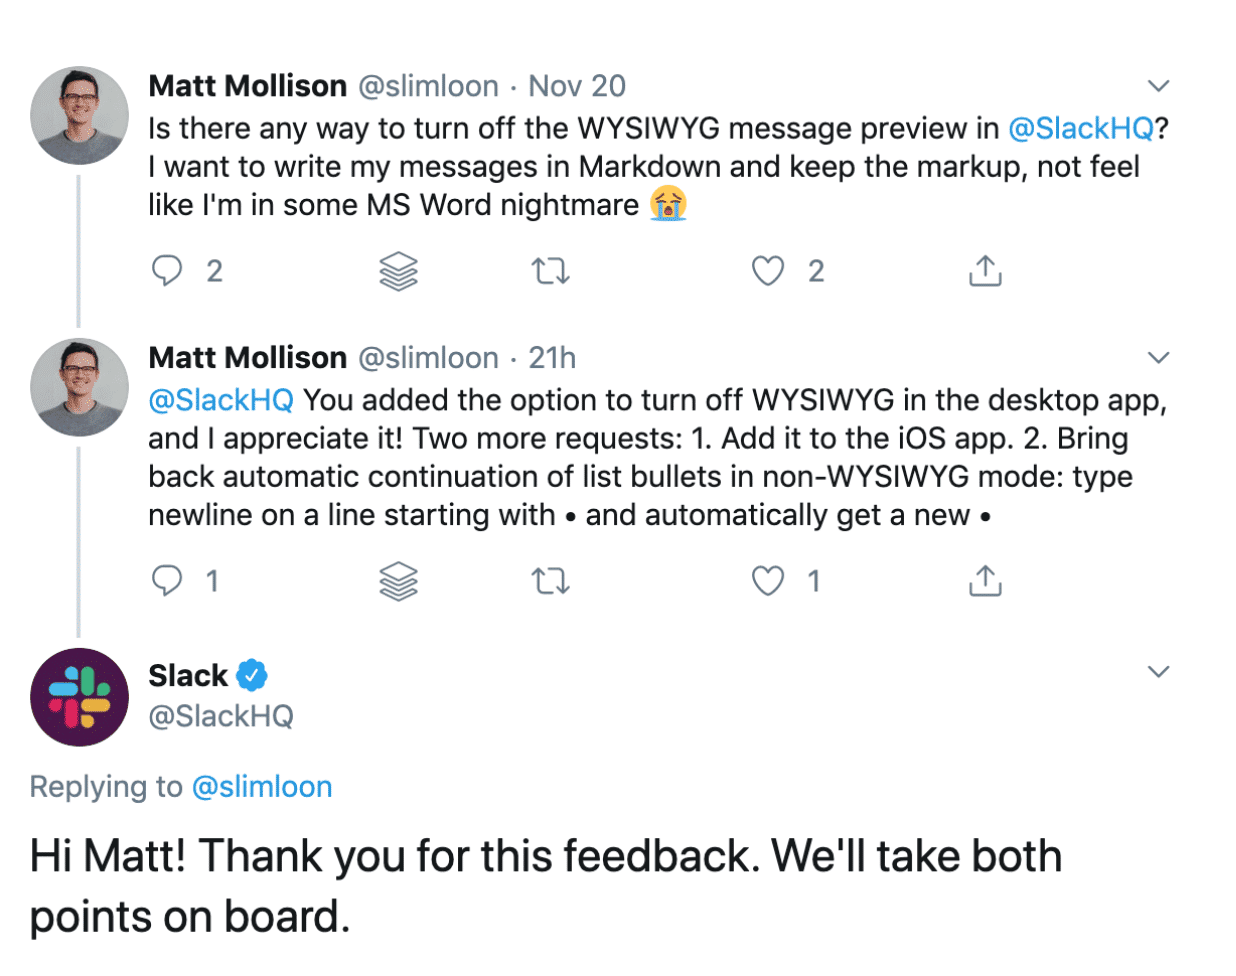 slack implementing and responding to customer feedback